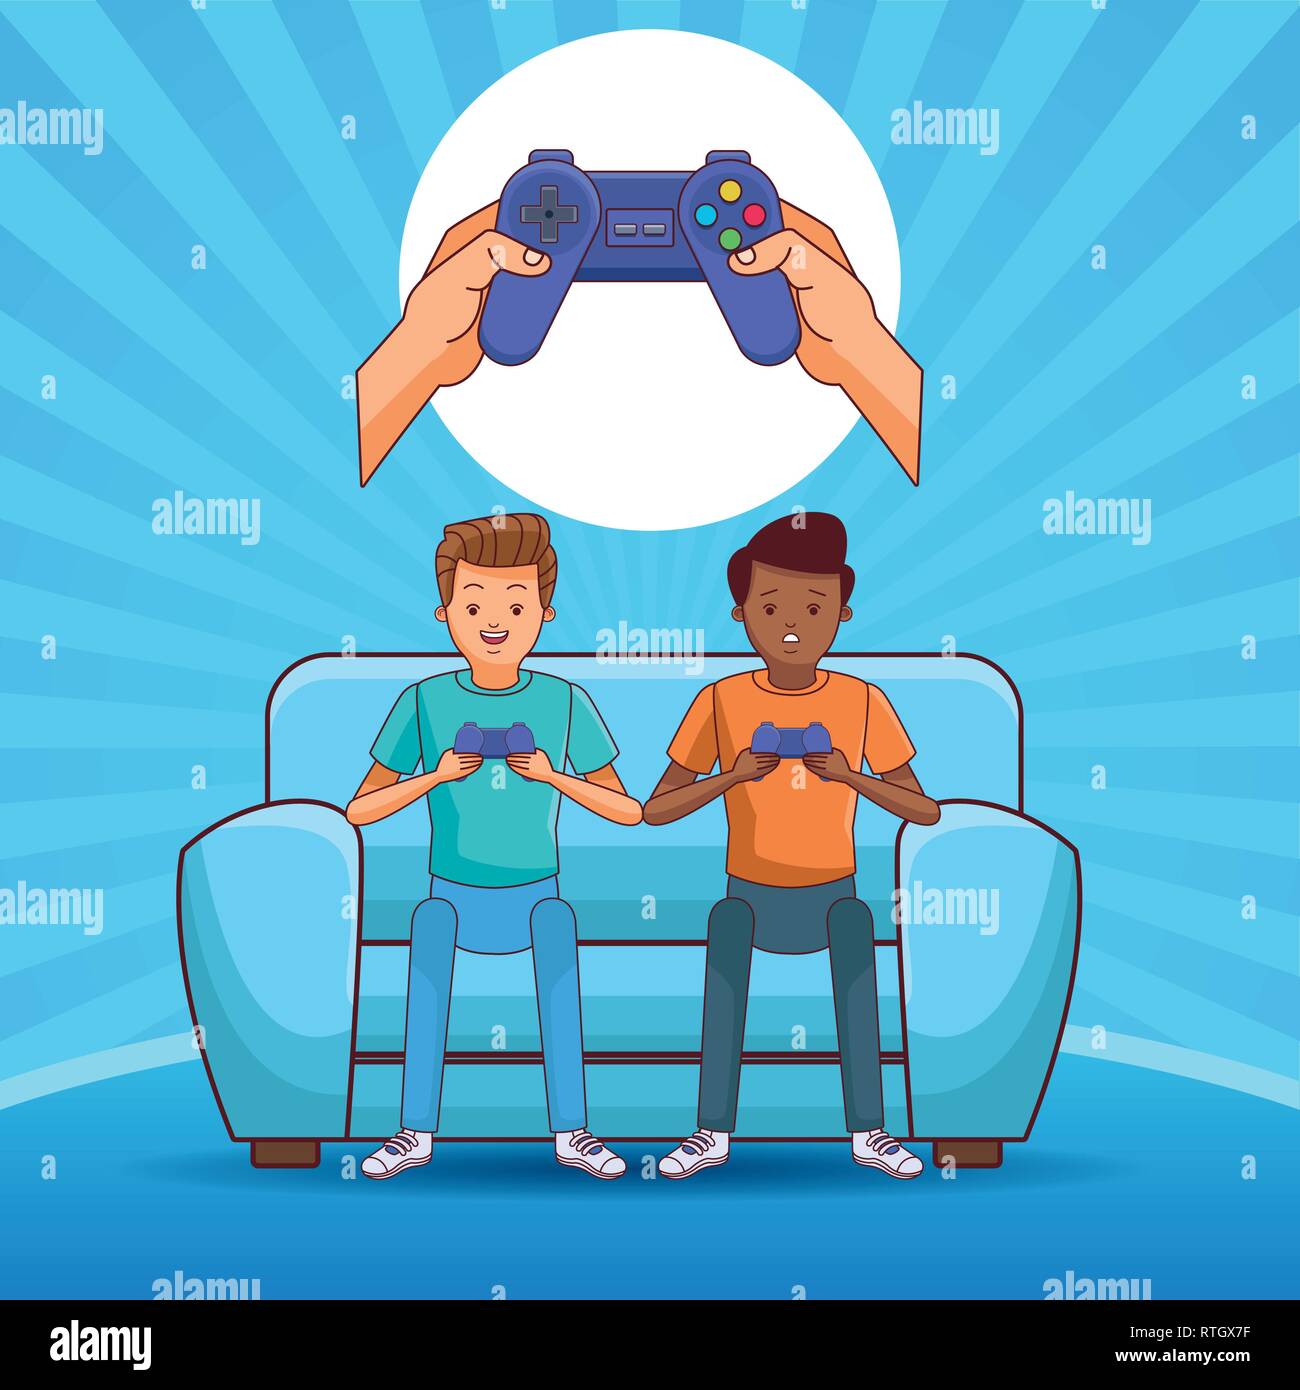 Back View of a Man Playing Online Games Stock Vector - Illustration of  teenager, tournament: 275102644